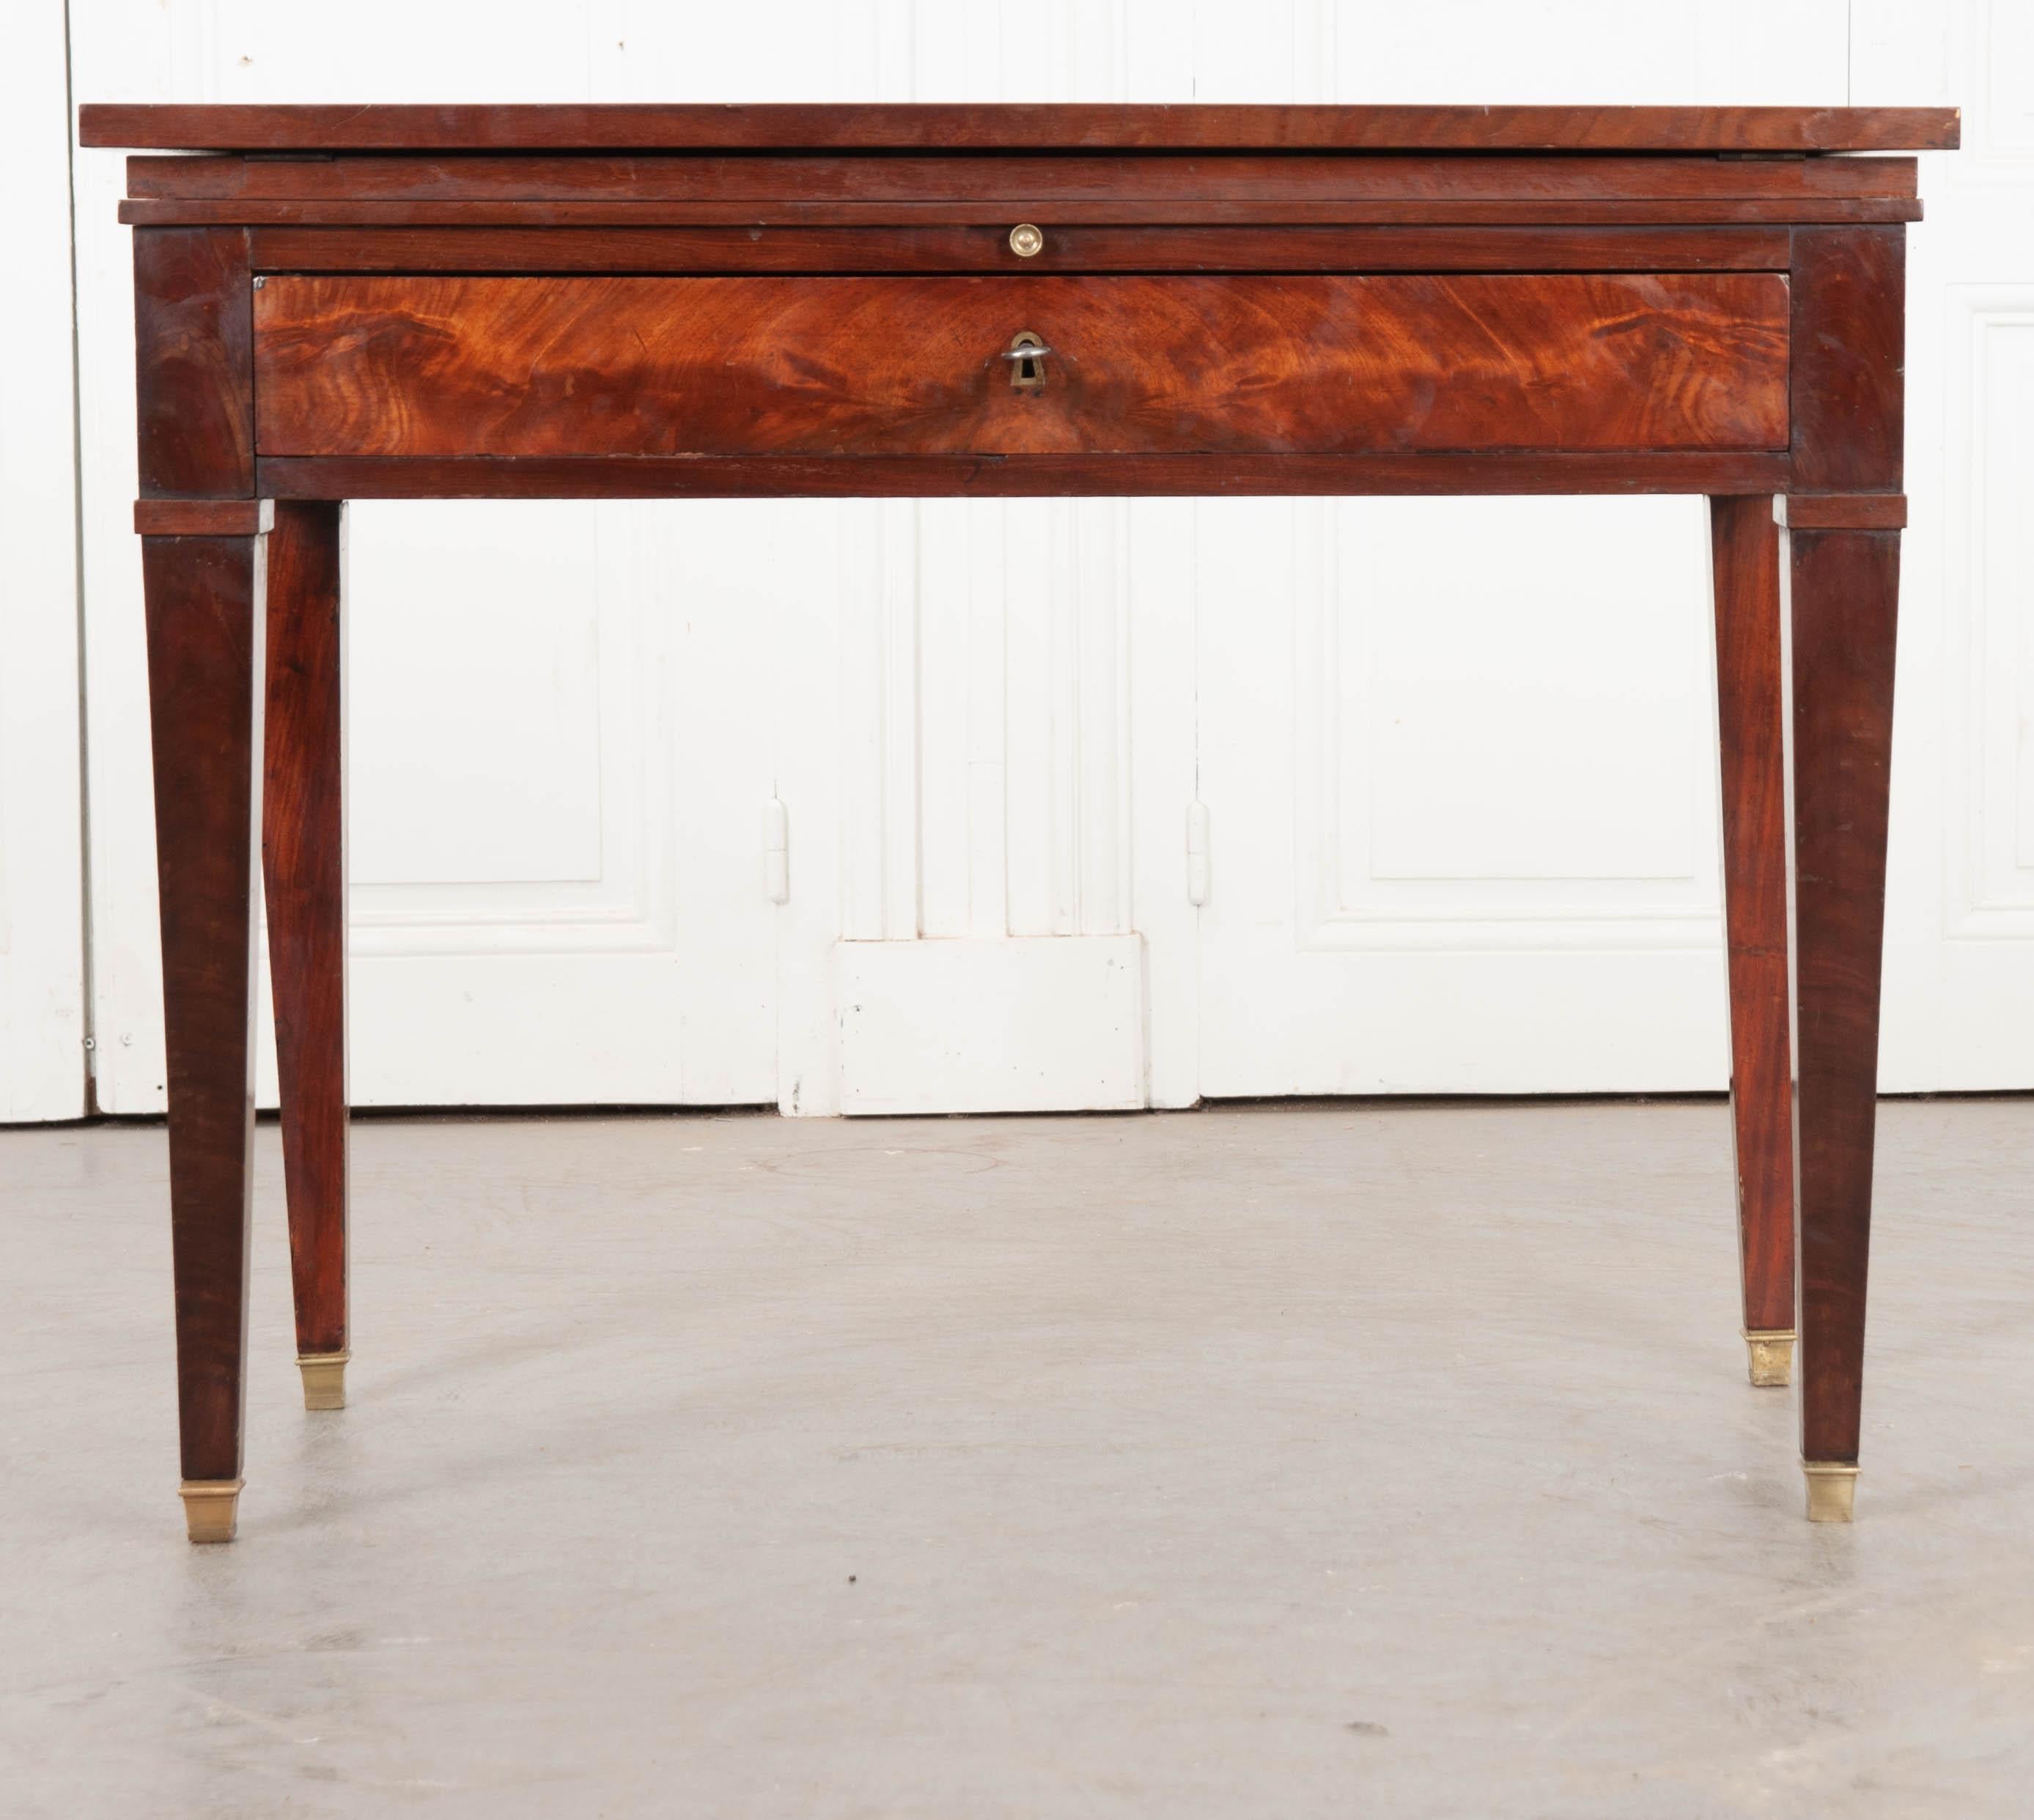 This specialized mahogany desk was made in France, circa 1810. Made in the Directoire style, this remarkable desk features a top that can be adjusted for sitting or standing. Used by architects and drafters, the desk’s tilted surface brings the back